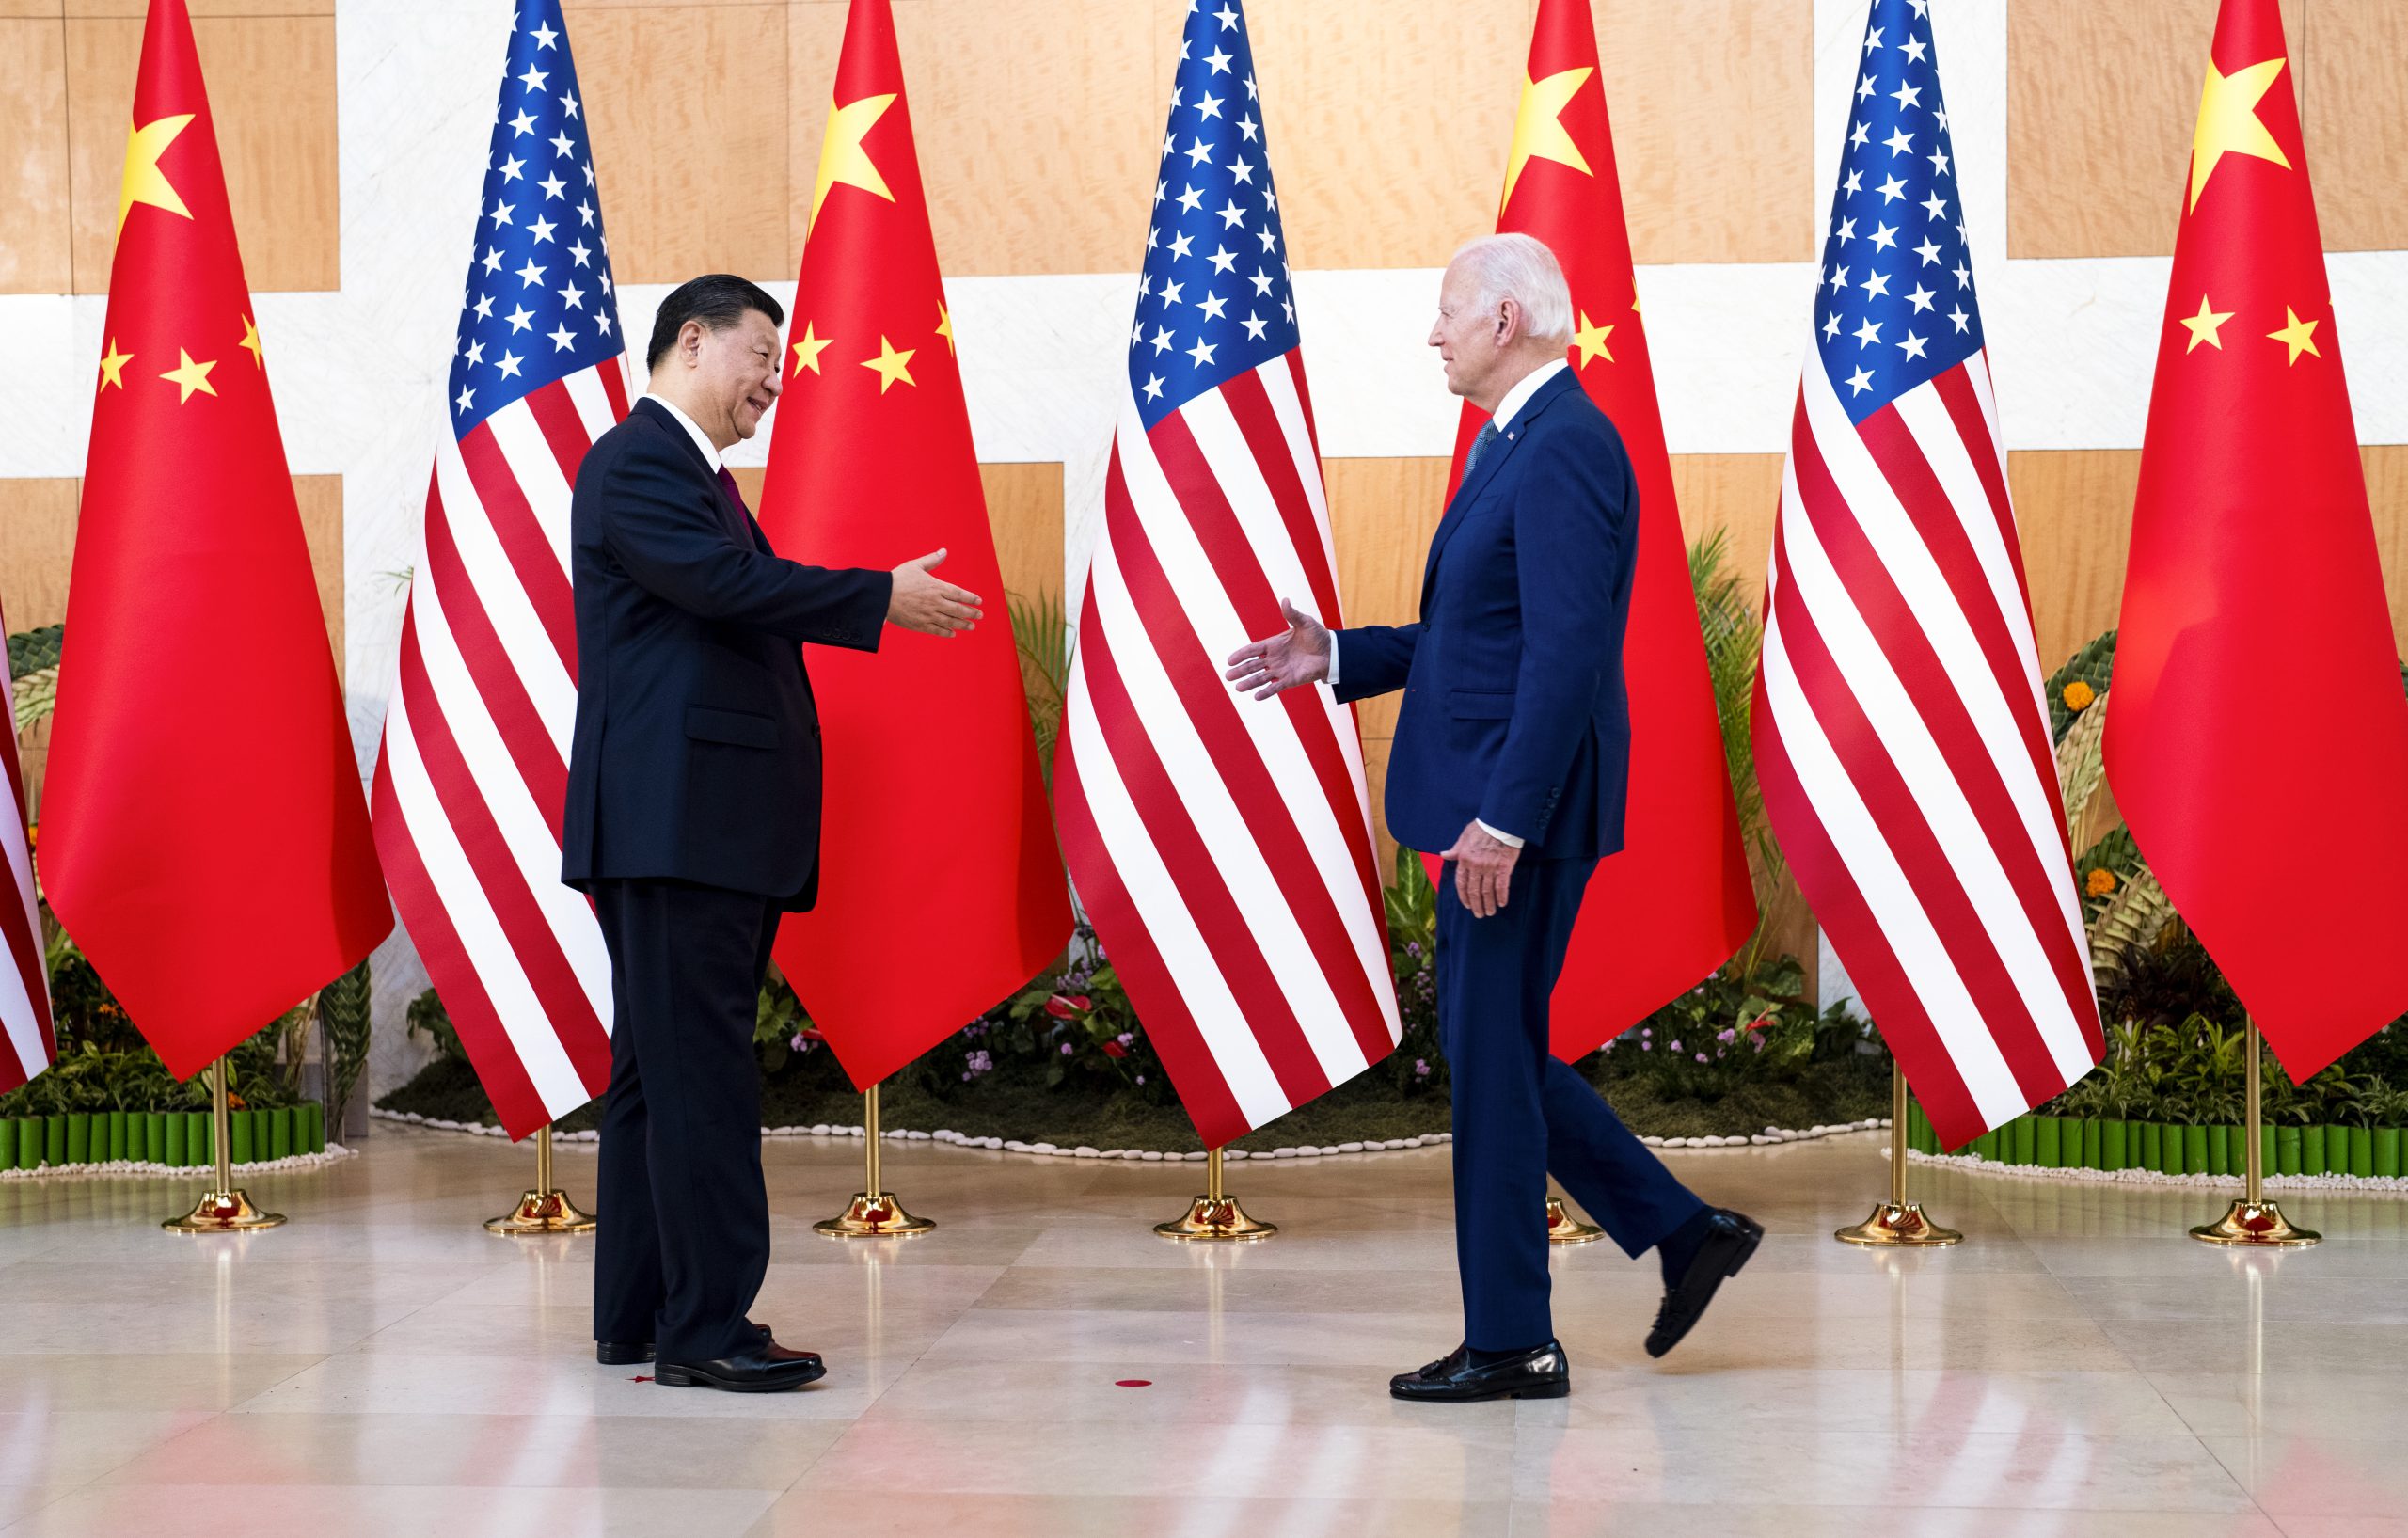 Xi is focused on the economy and competition with the United States